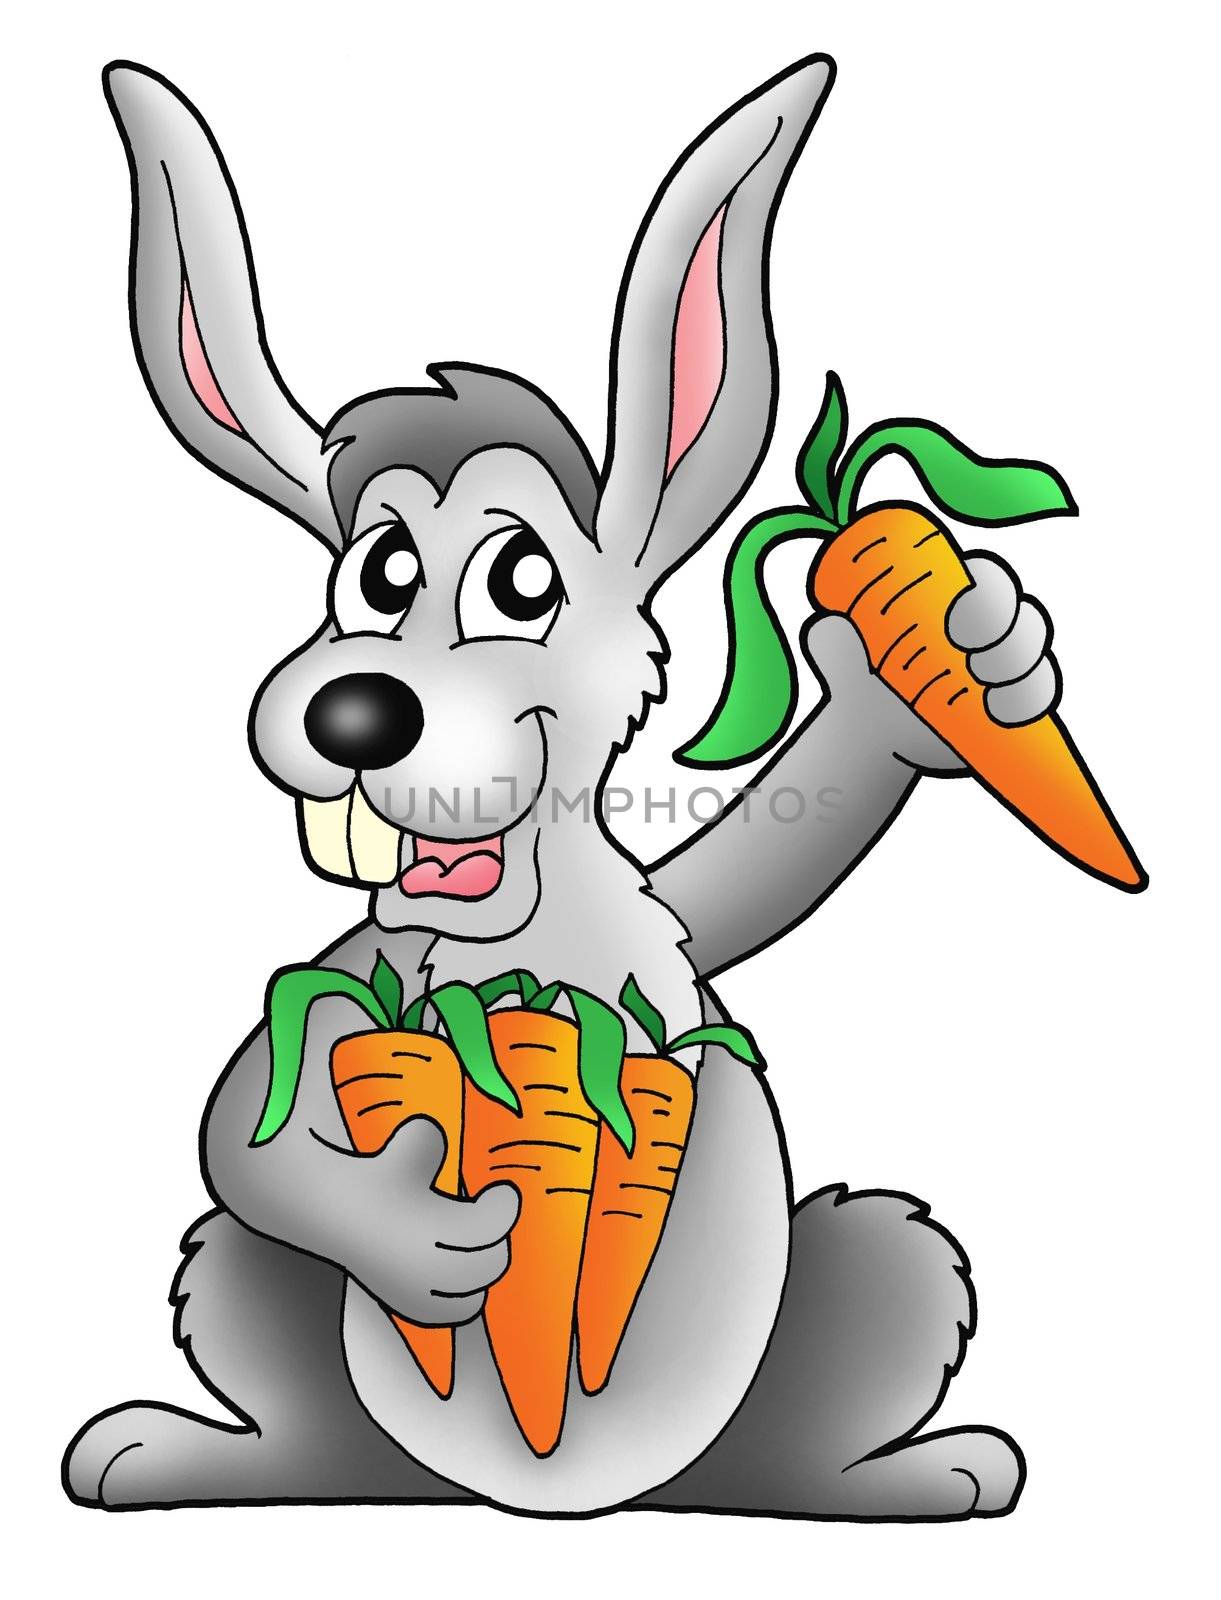 Rabbit with carrot by clairev